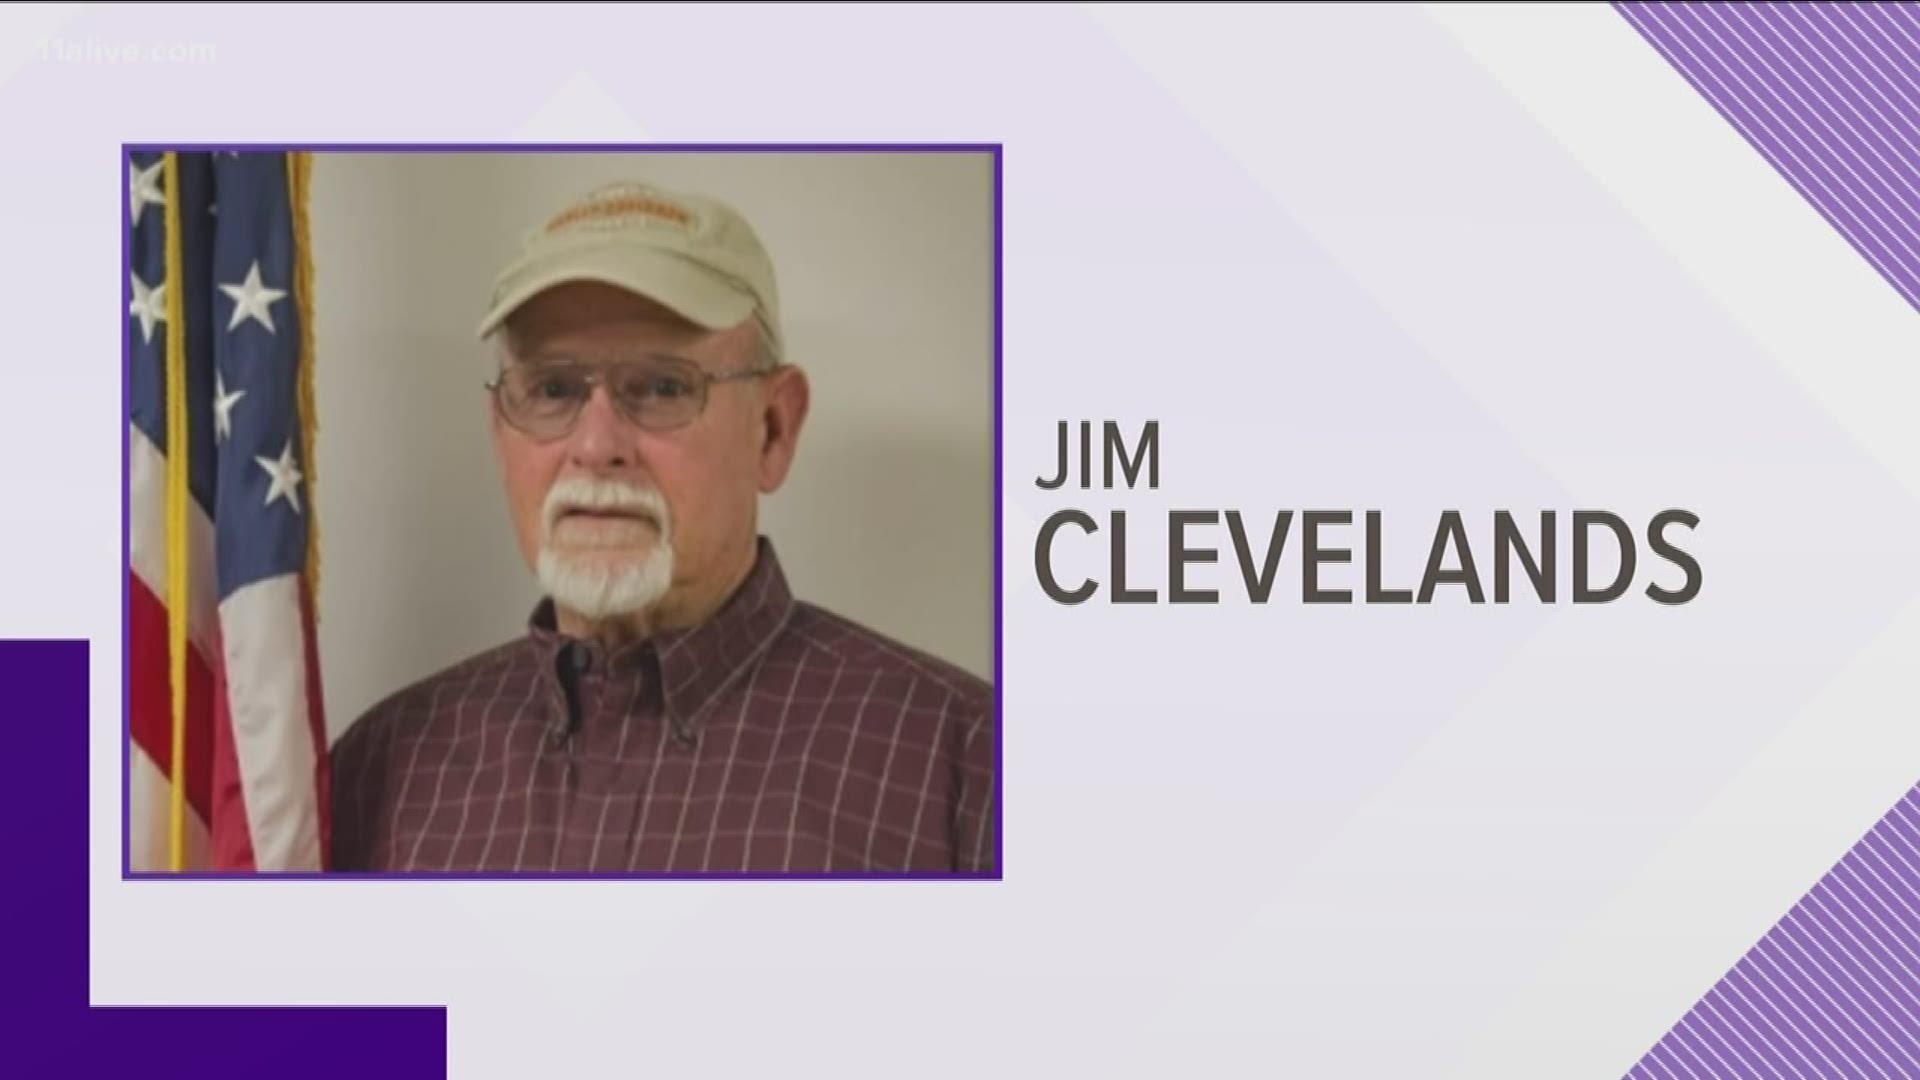 "I have resigned effective today at 3 p.m.," Jim Cleveland said in an email to 11Alive.